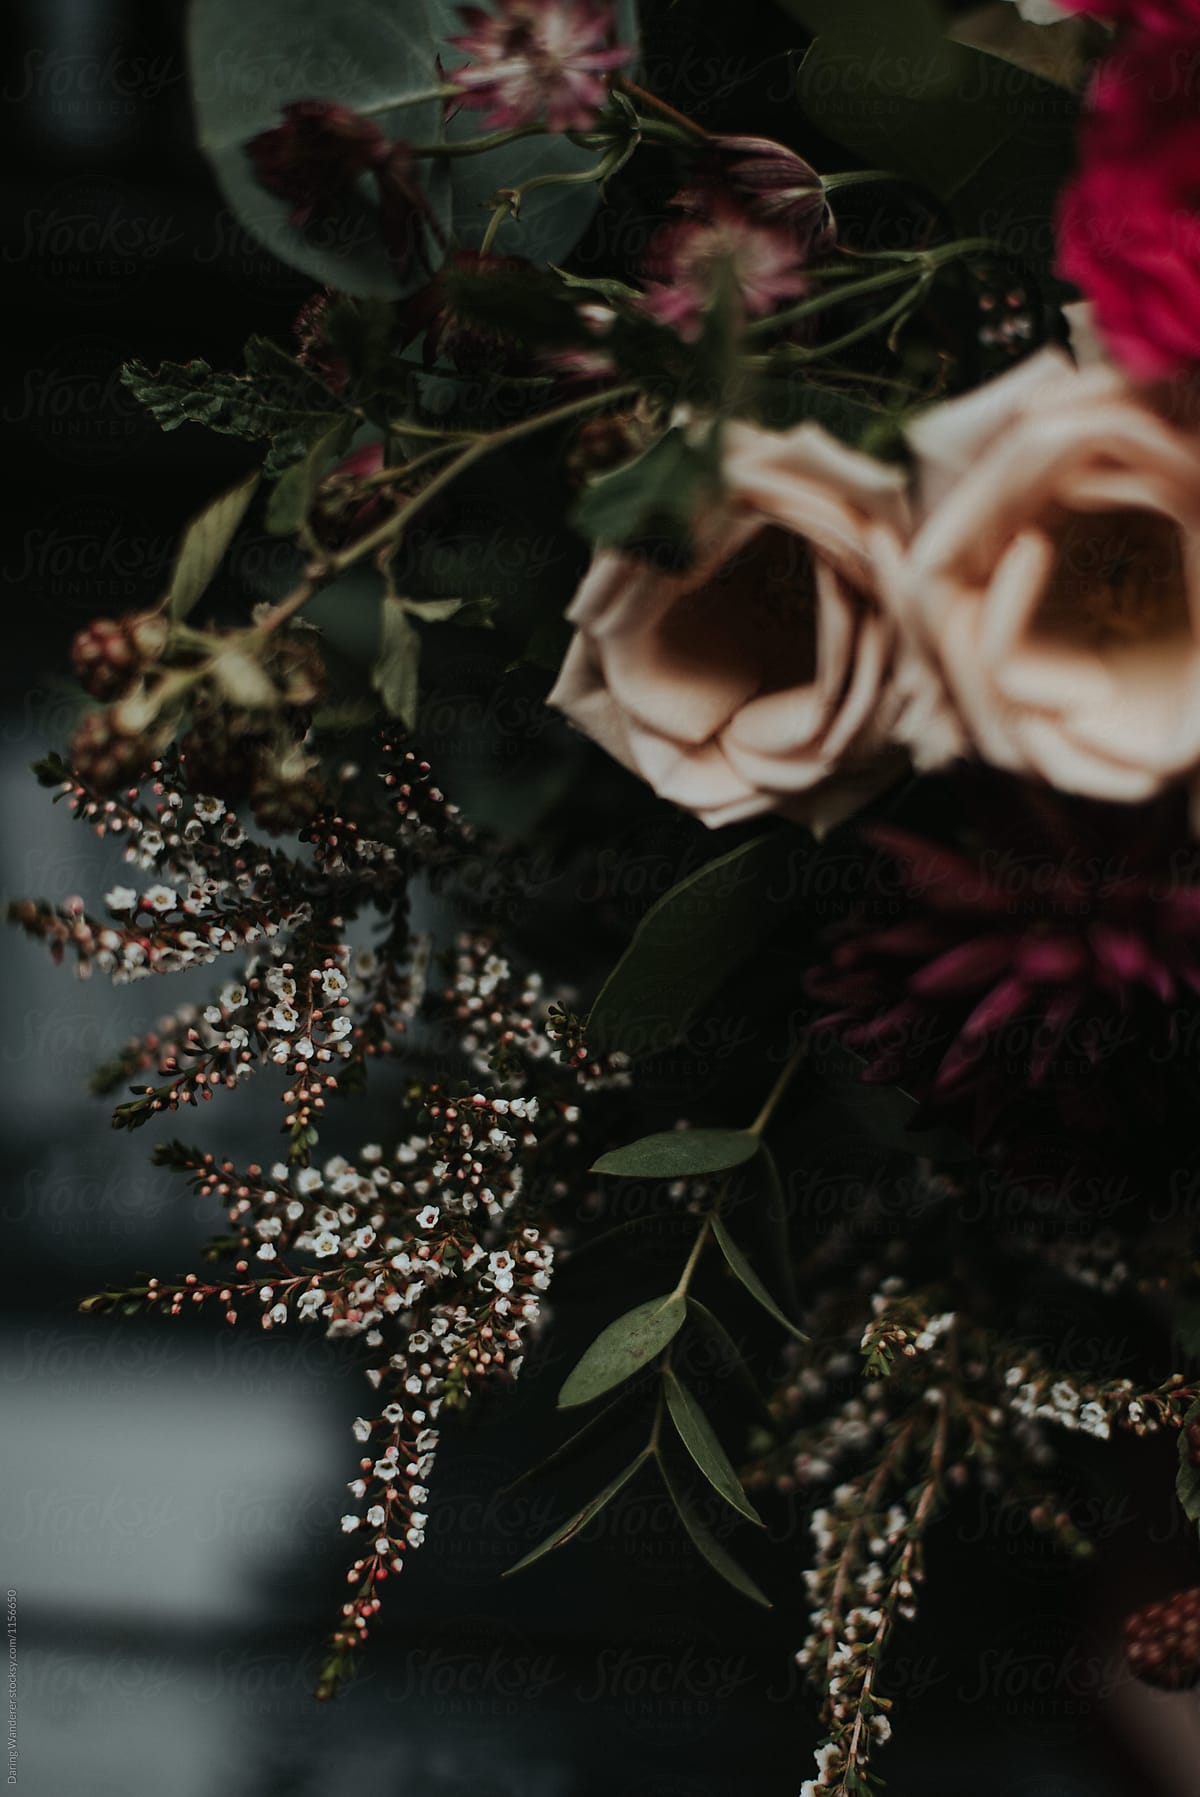 Romantic pink and dark red fall wedding bouquet inspiration